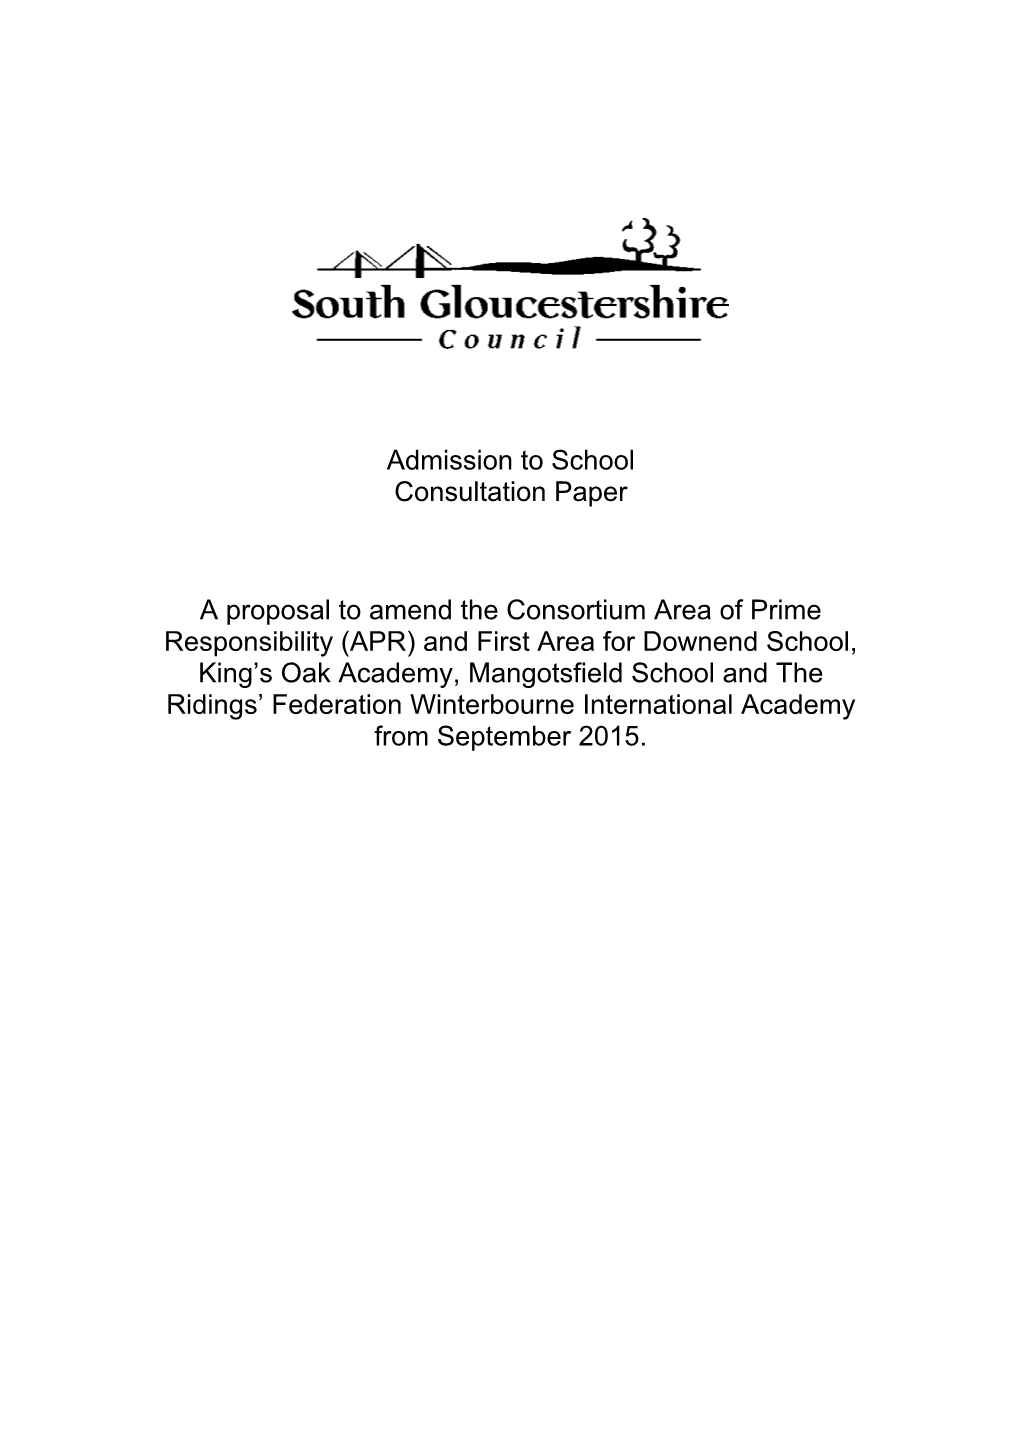 Admission to School Consultation Paper a Proposal to Amend The